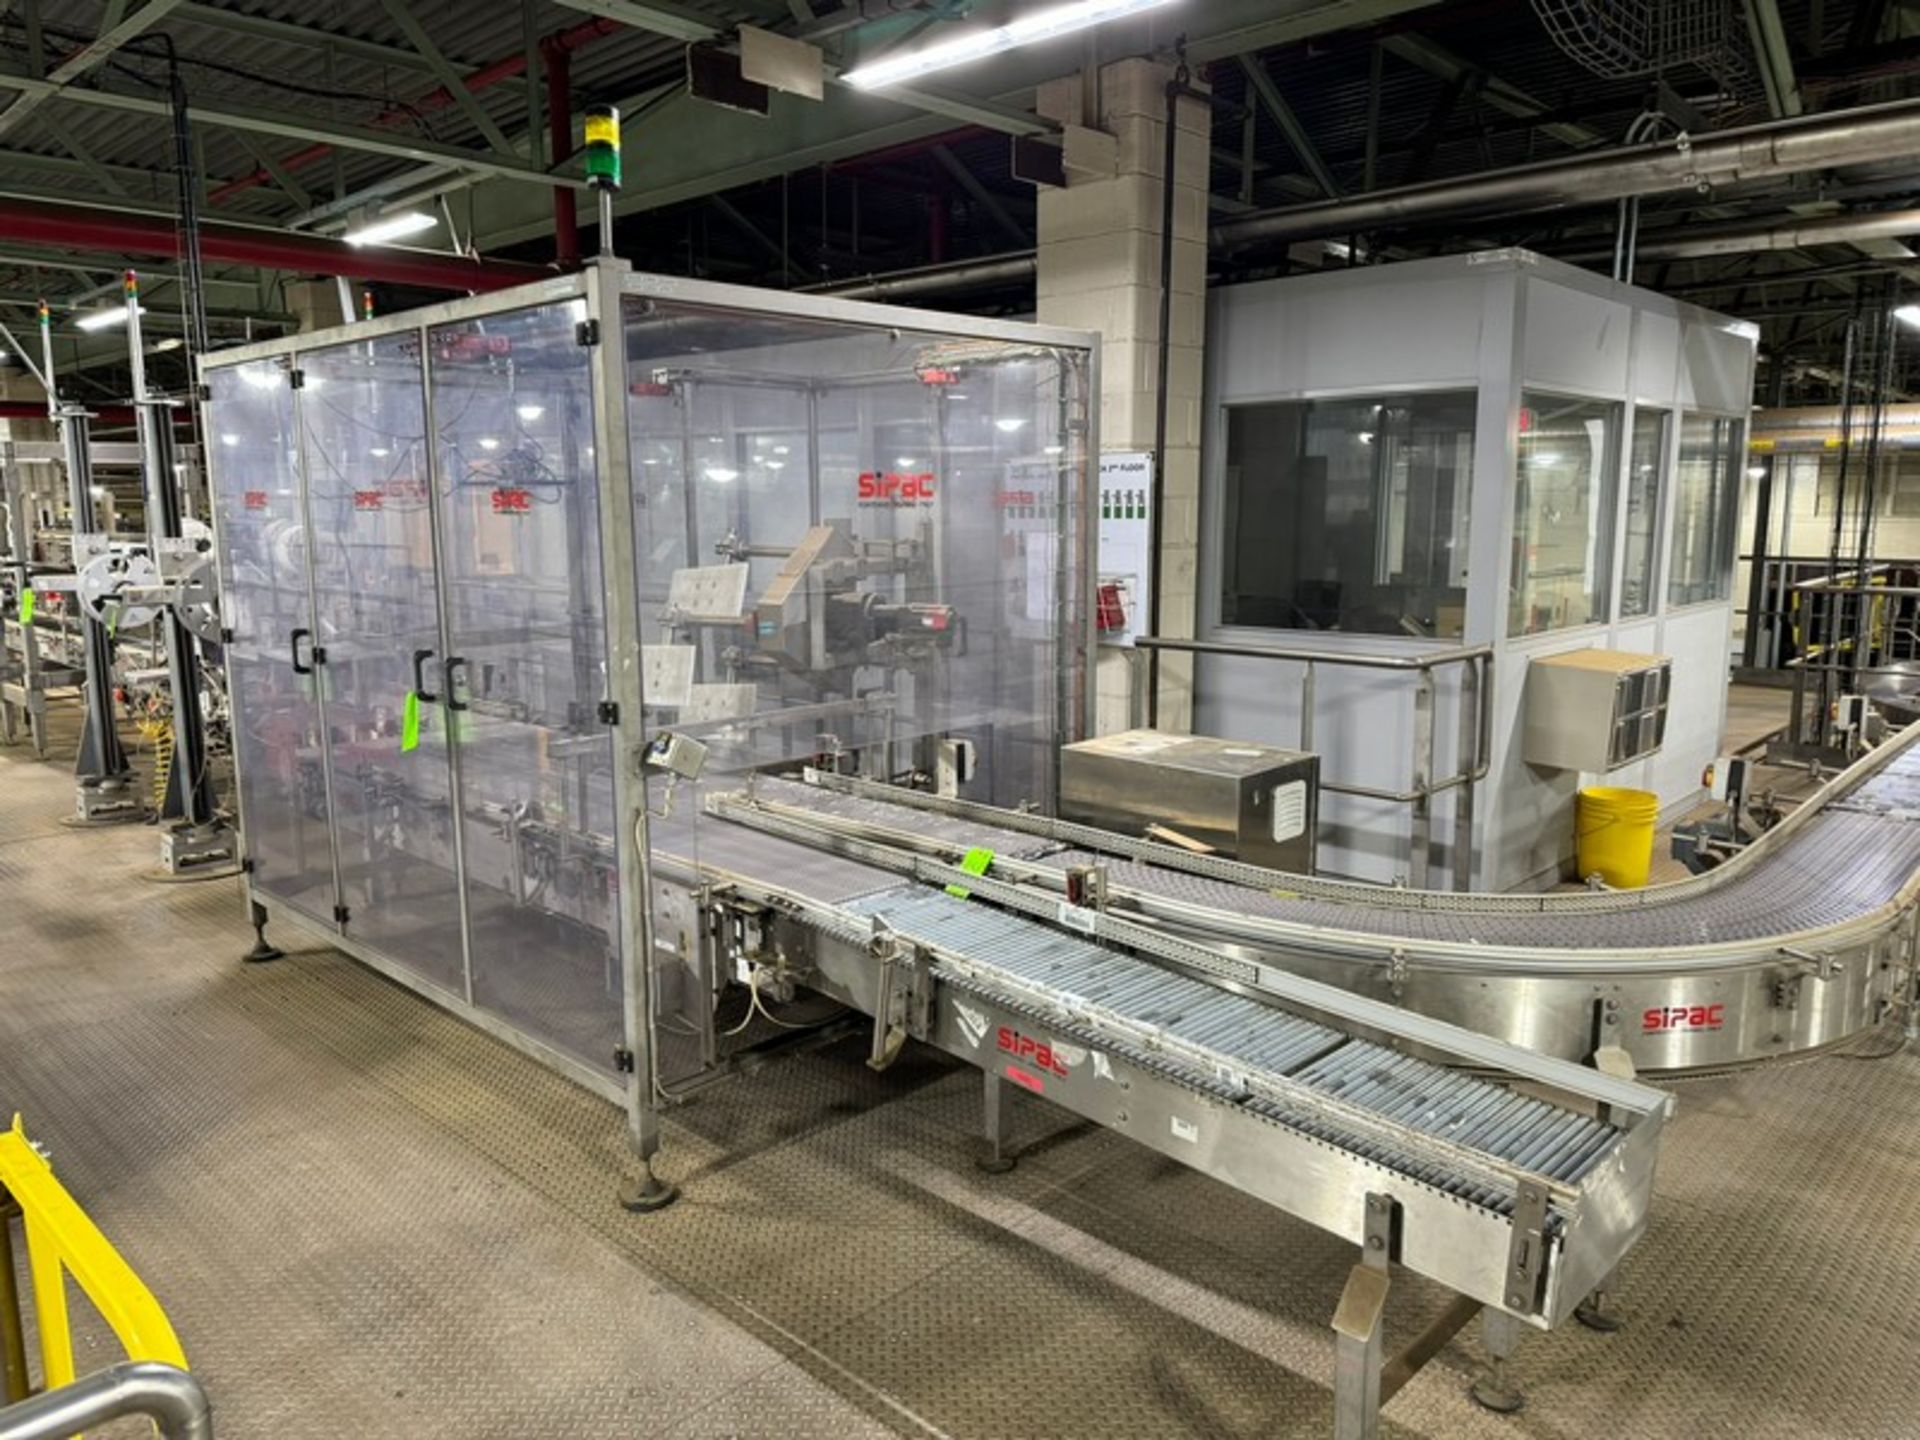 SIPAC Orientor, with Aprox. 36-3/4” W Conveyor Belt, with Enclosure (LOCATED IN FREEHOLD, N.J.) - Image 2 of 7